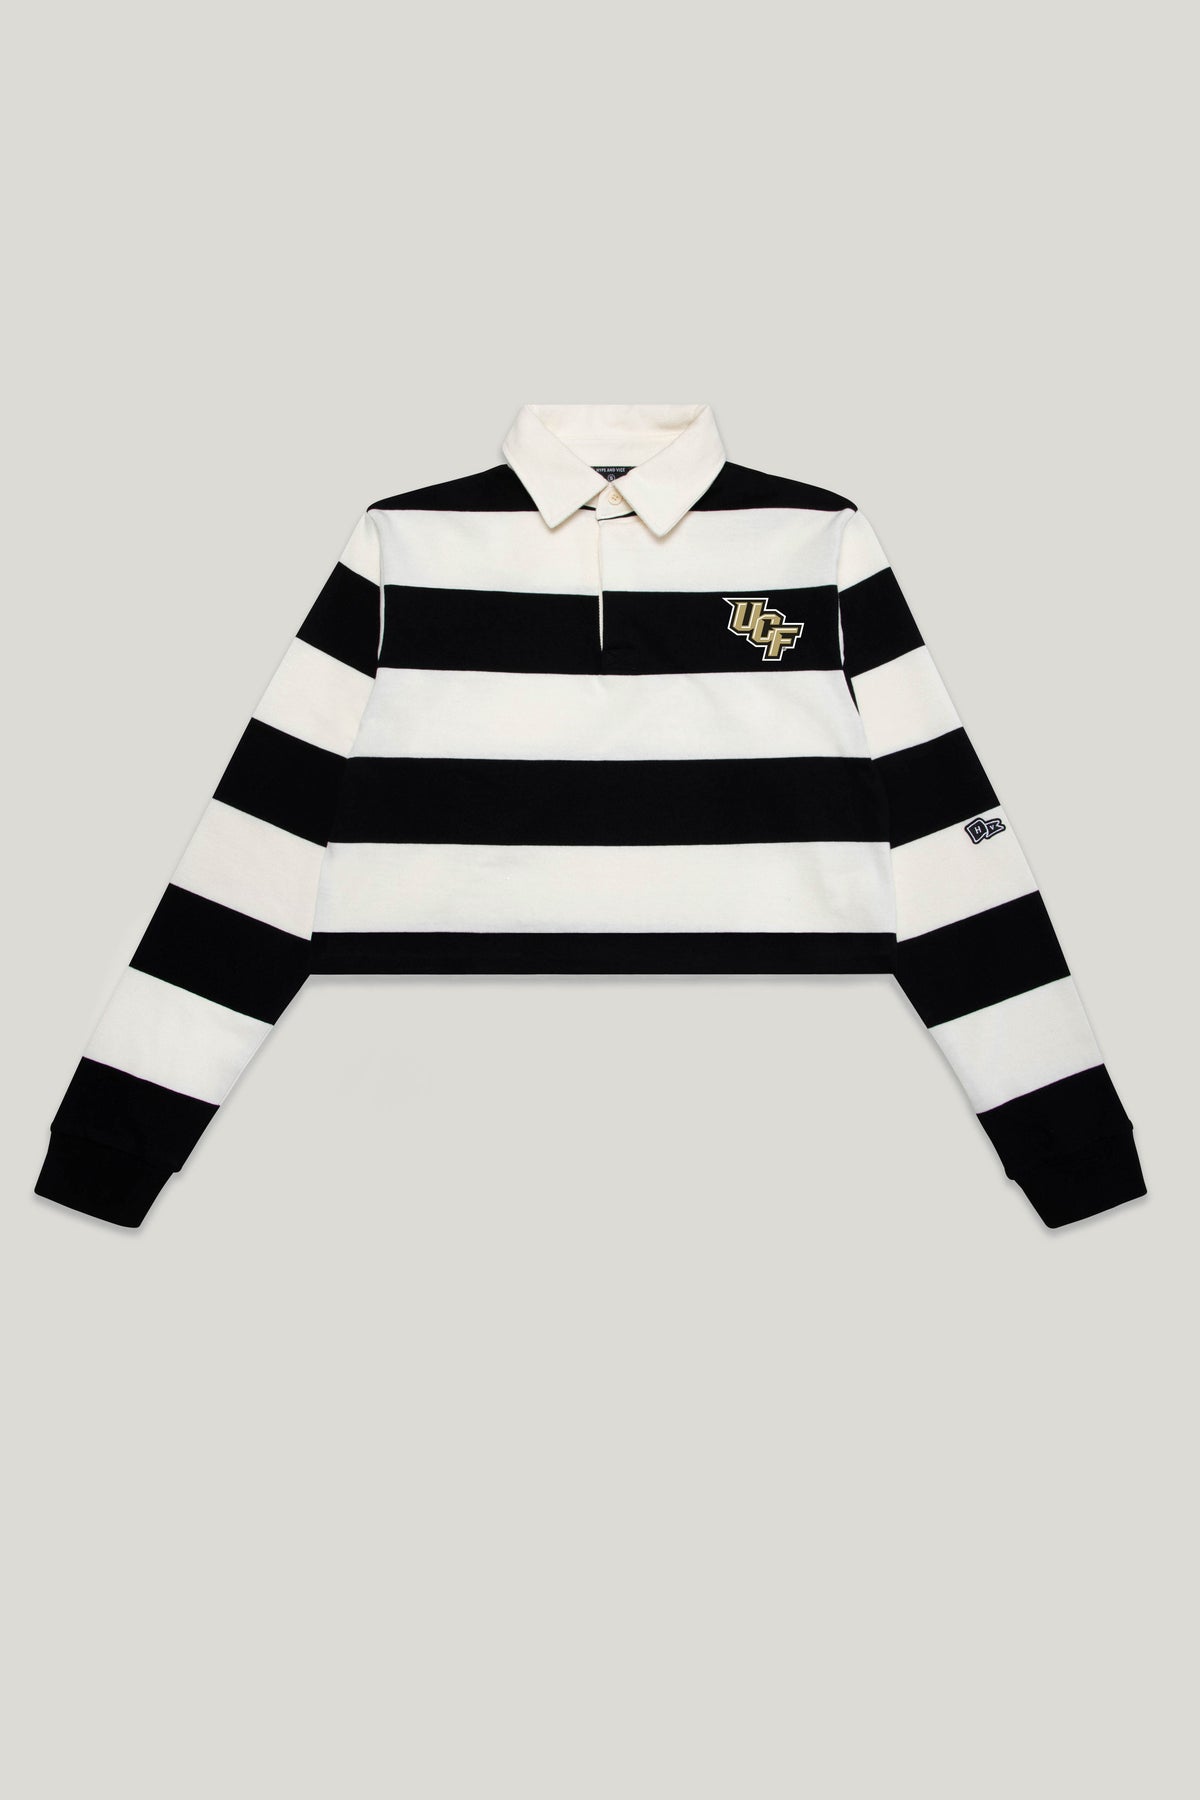 UCF Rugby Top